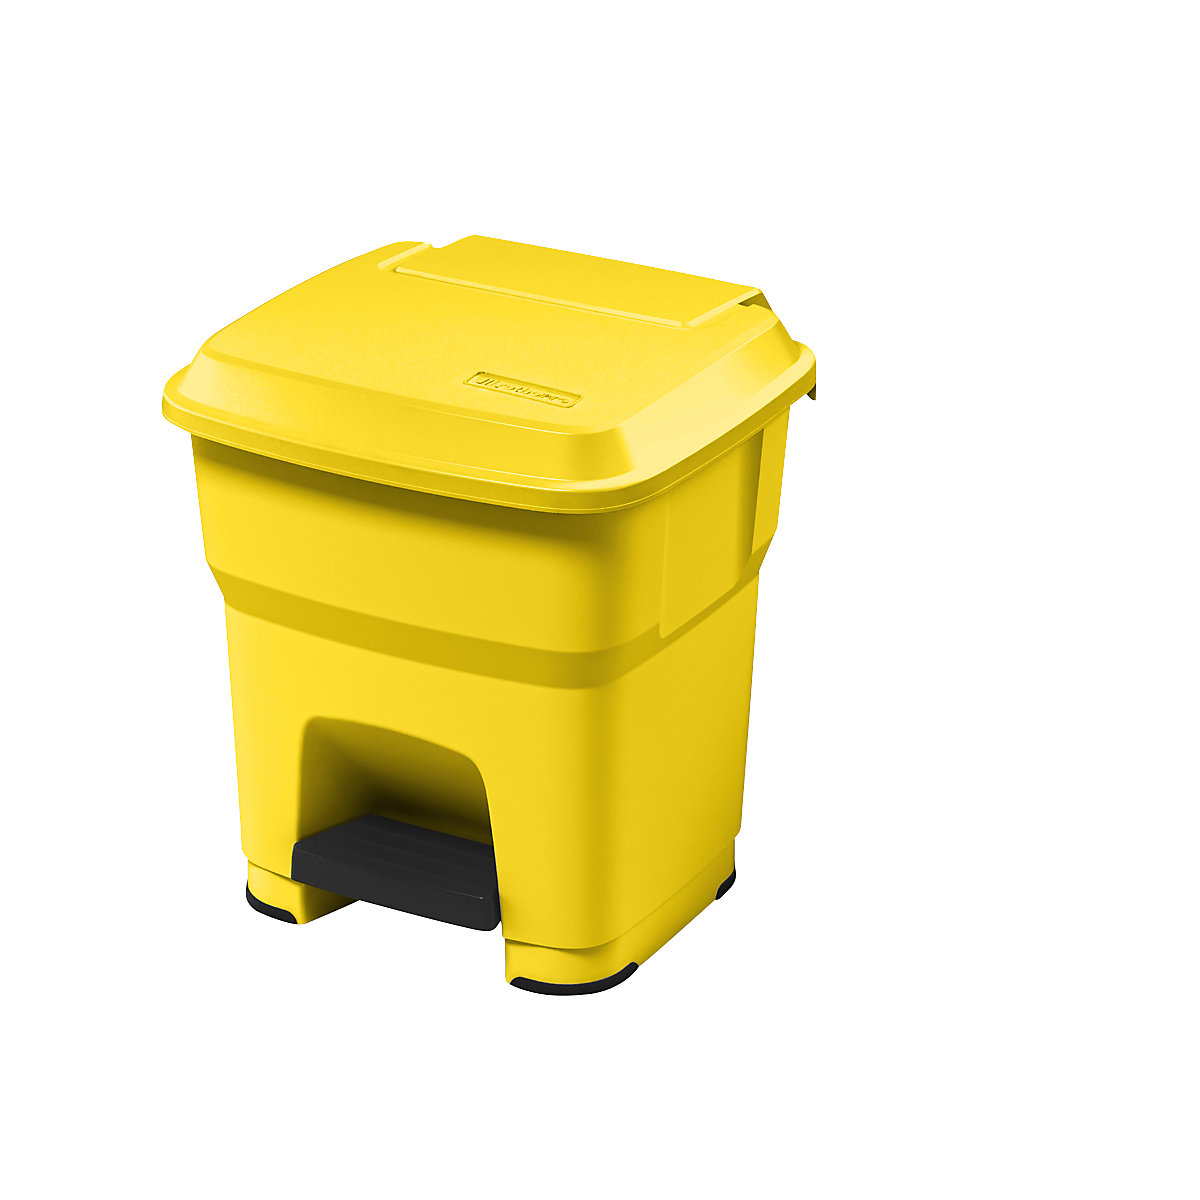 rothopro – HERA waste collector with pedal, capacity 35 l, WxHxD 390 x 440 x 390 mm, yellow